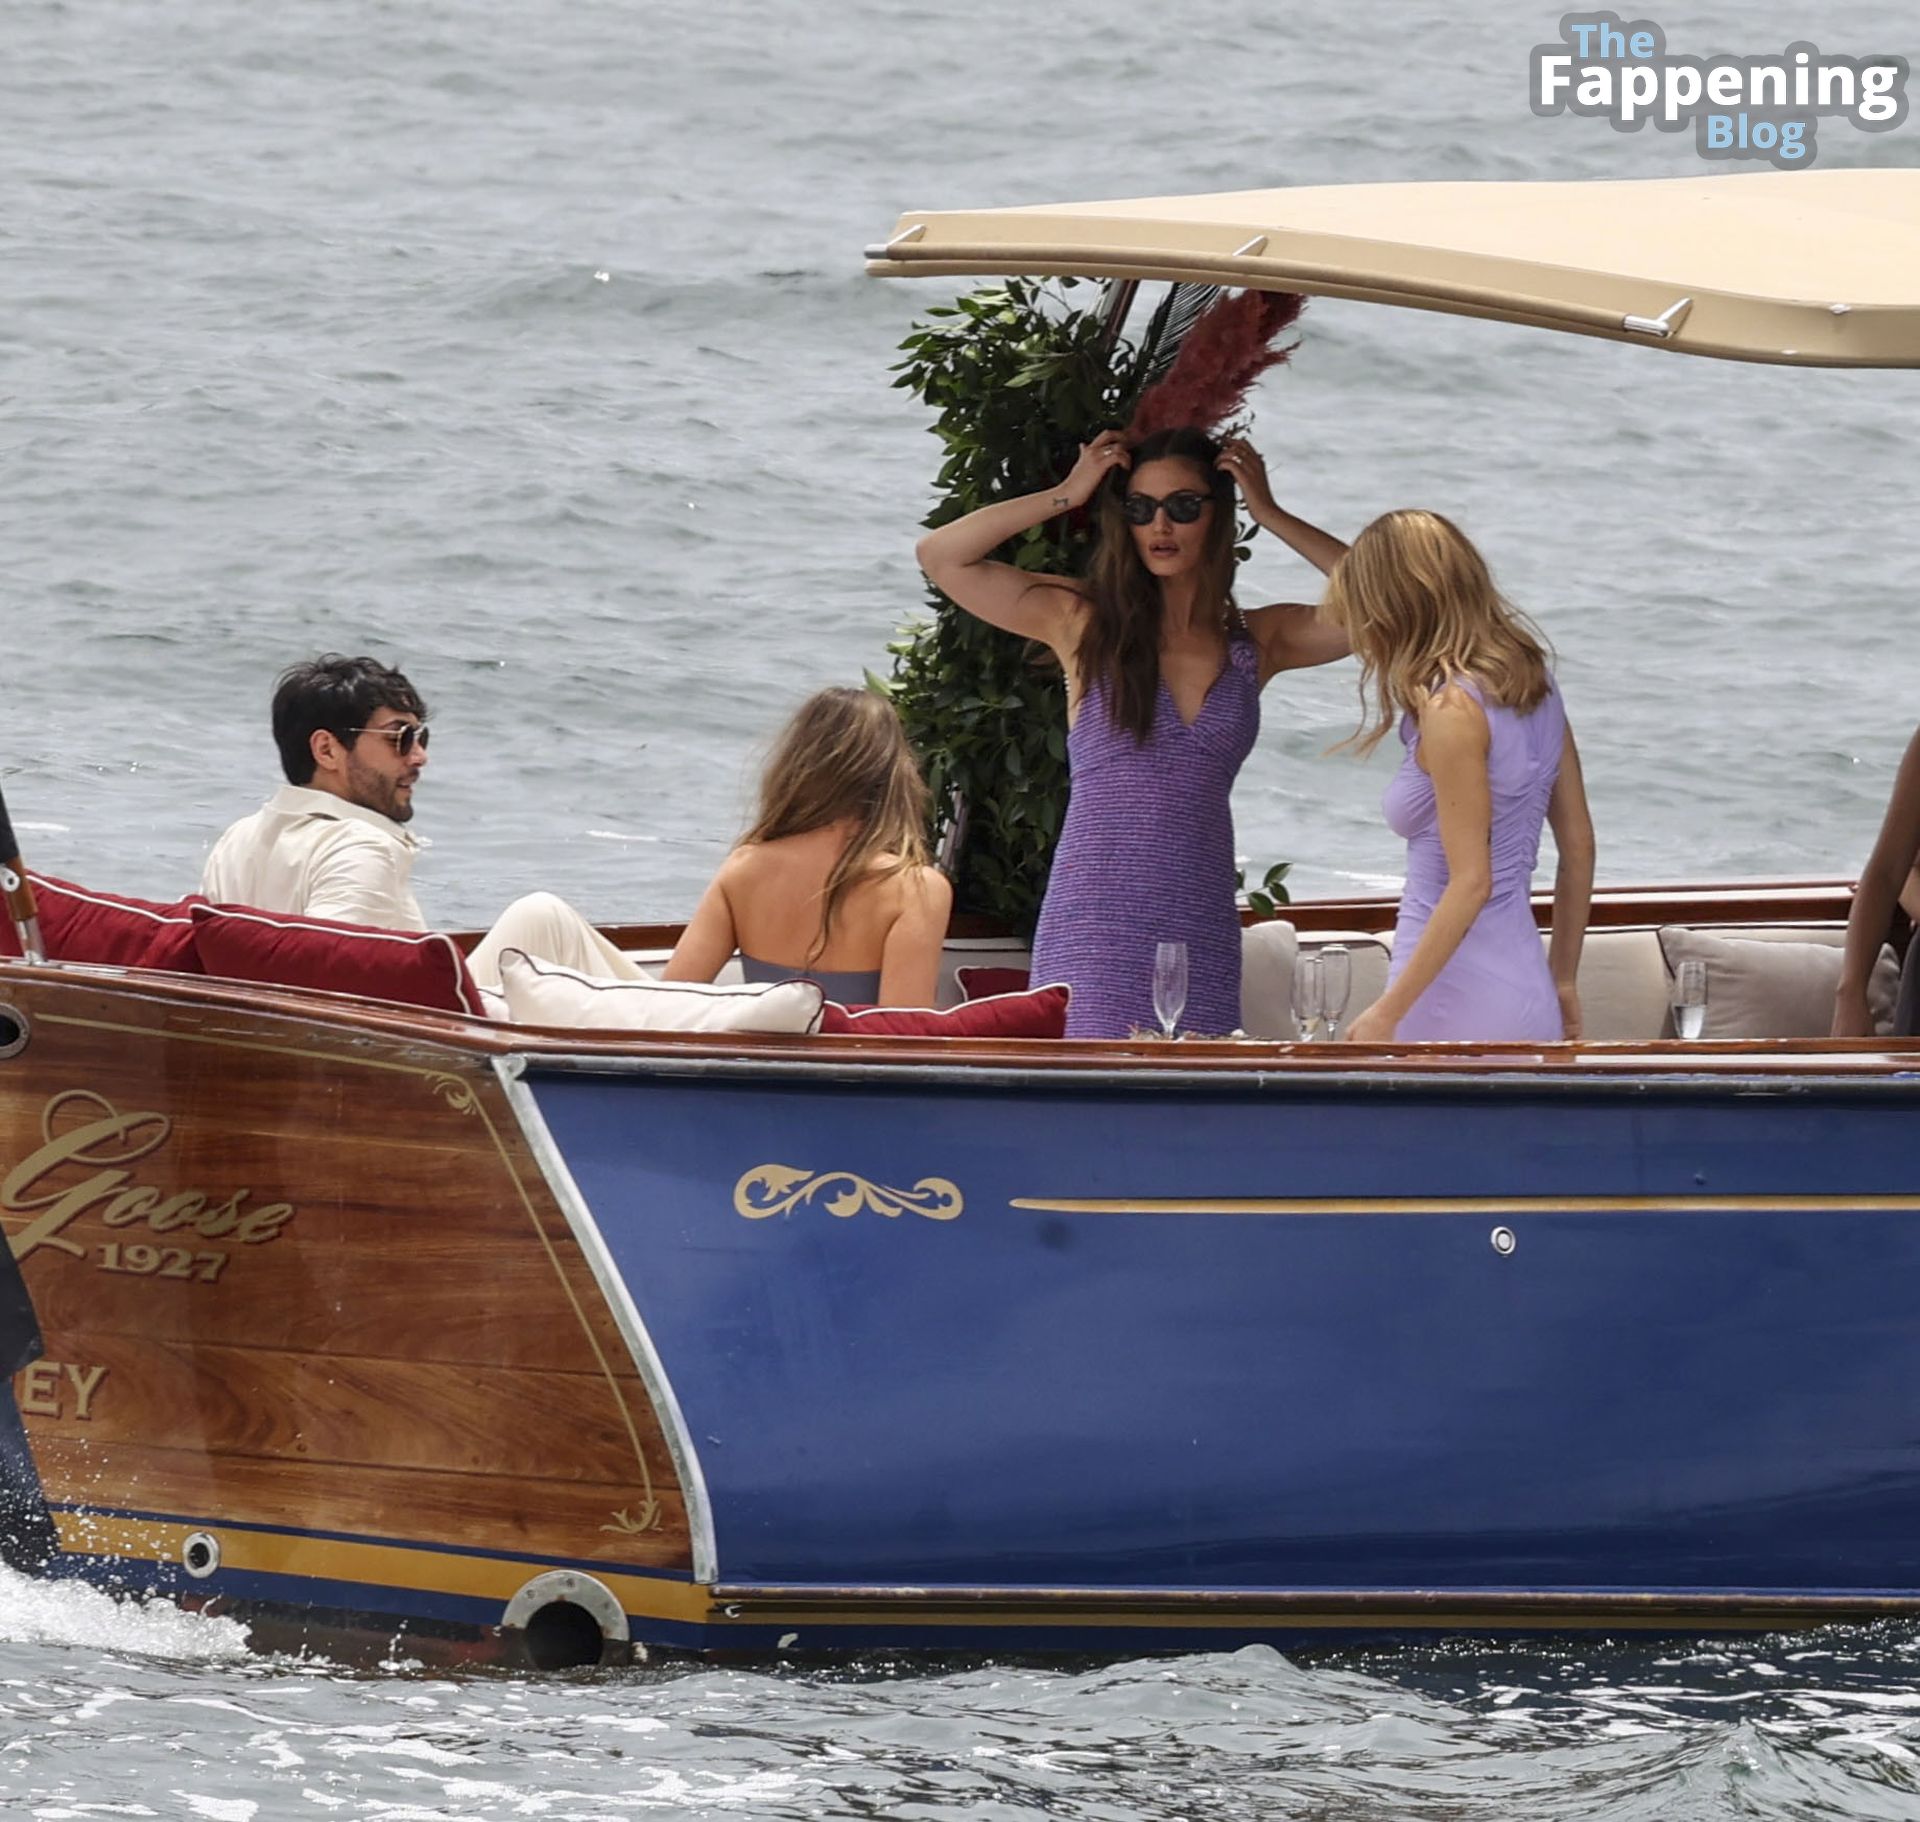 Samara Weaving Displays Her Sexy Tits as She Enjoys a Day with Her Friends on a Boat in Sydney (35 Photos)